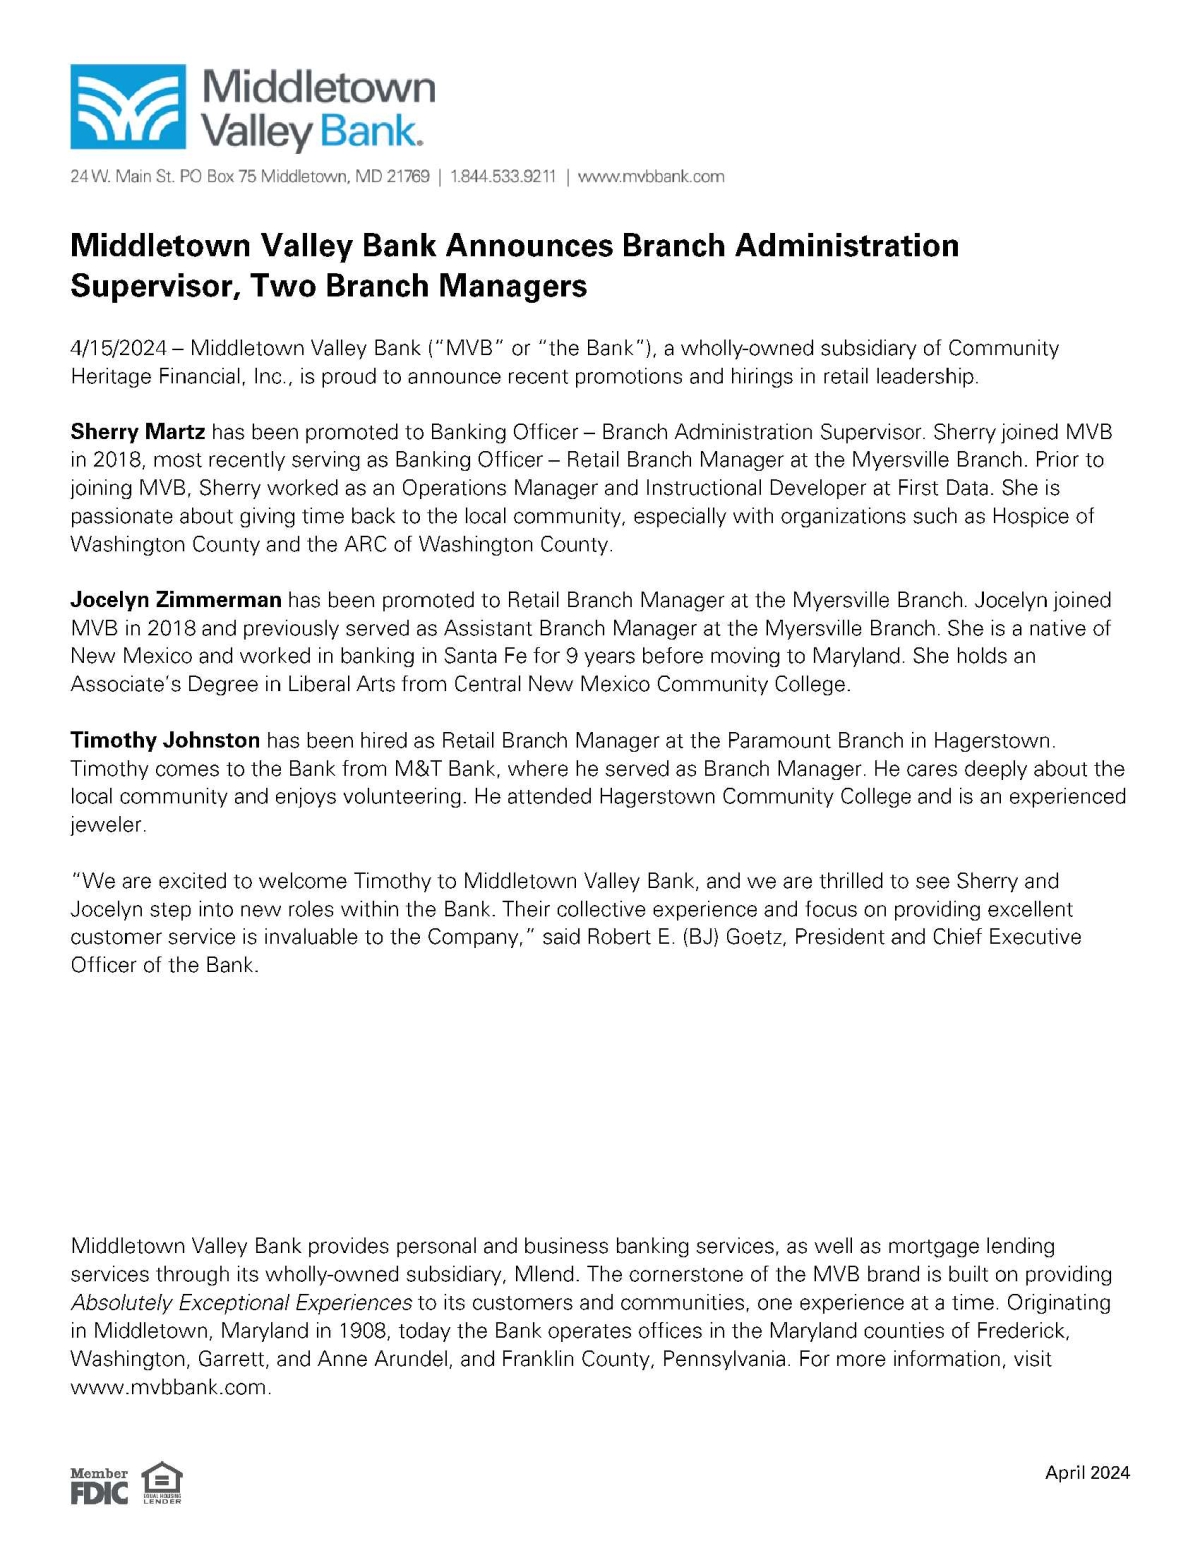 MVB Announces Branch Administration Supervisor, Two Branch Managers